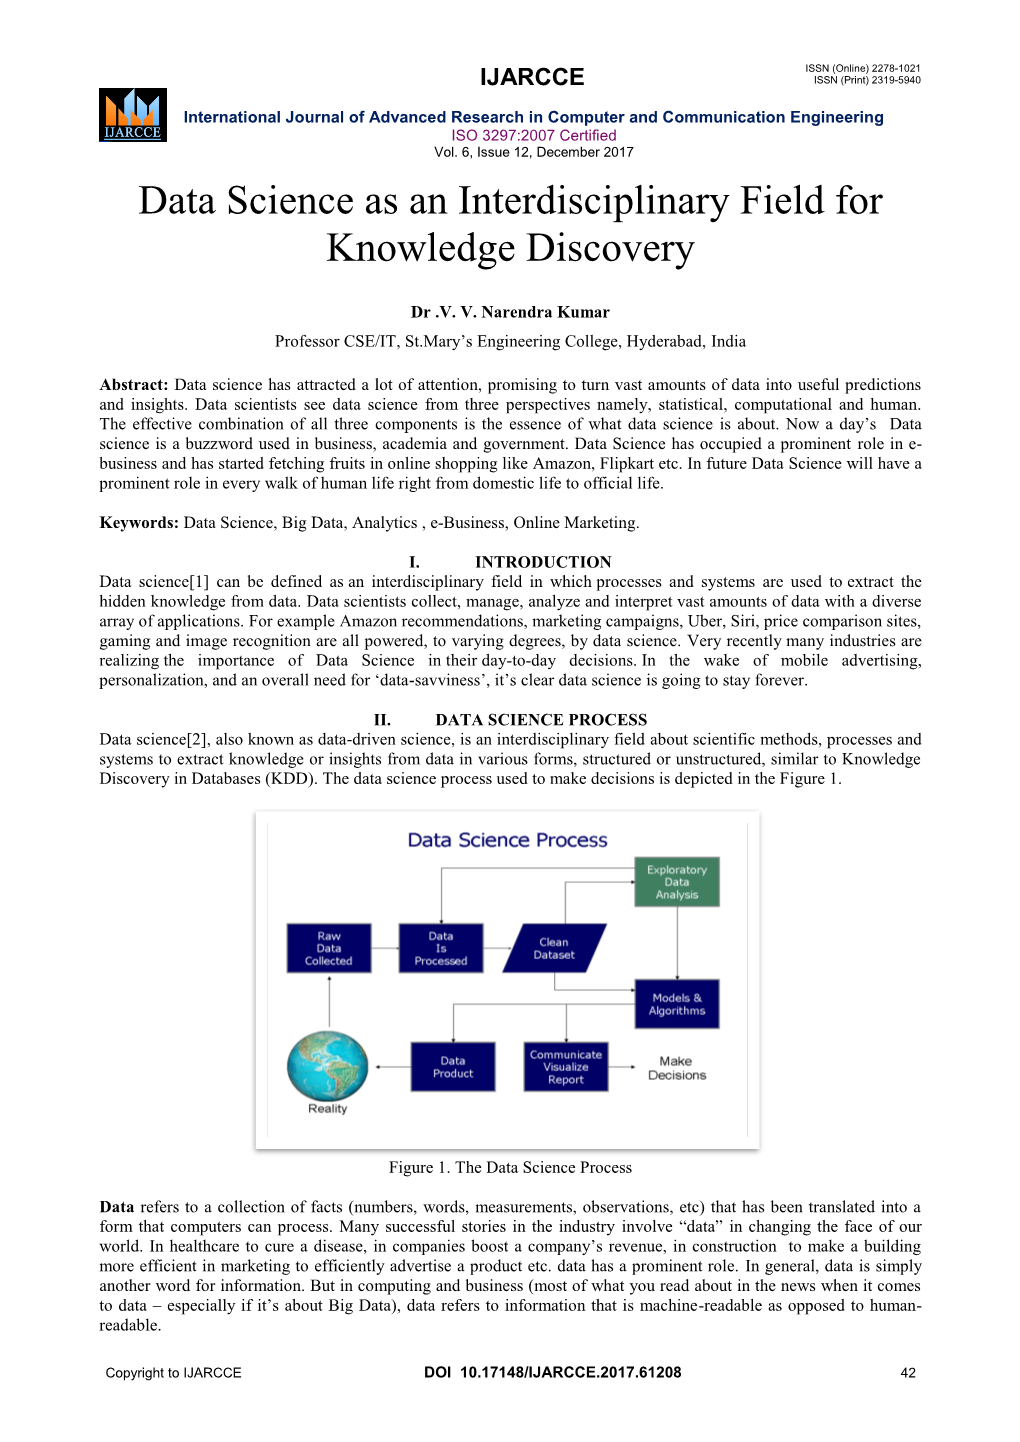 Data Science As an Interdisciplinary Field for Knowledge Discovery